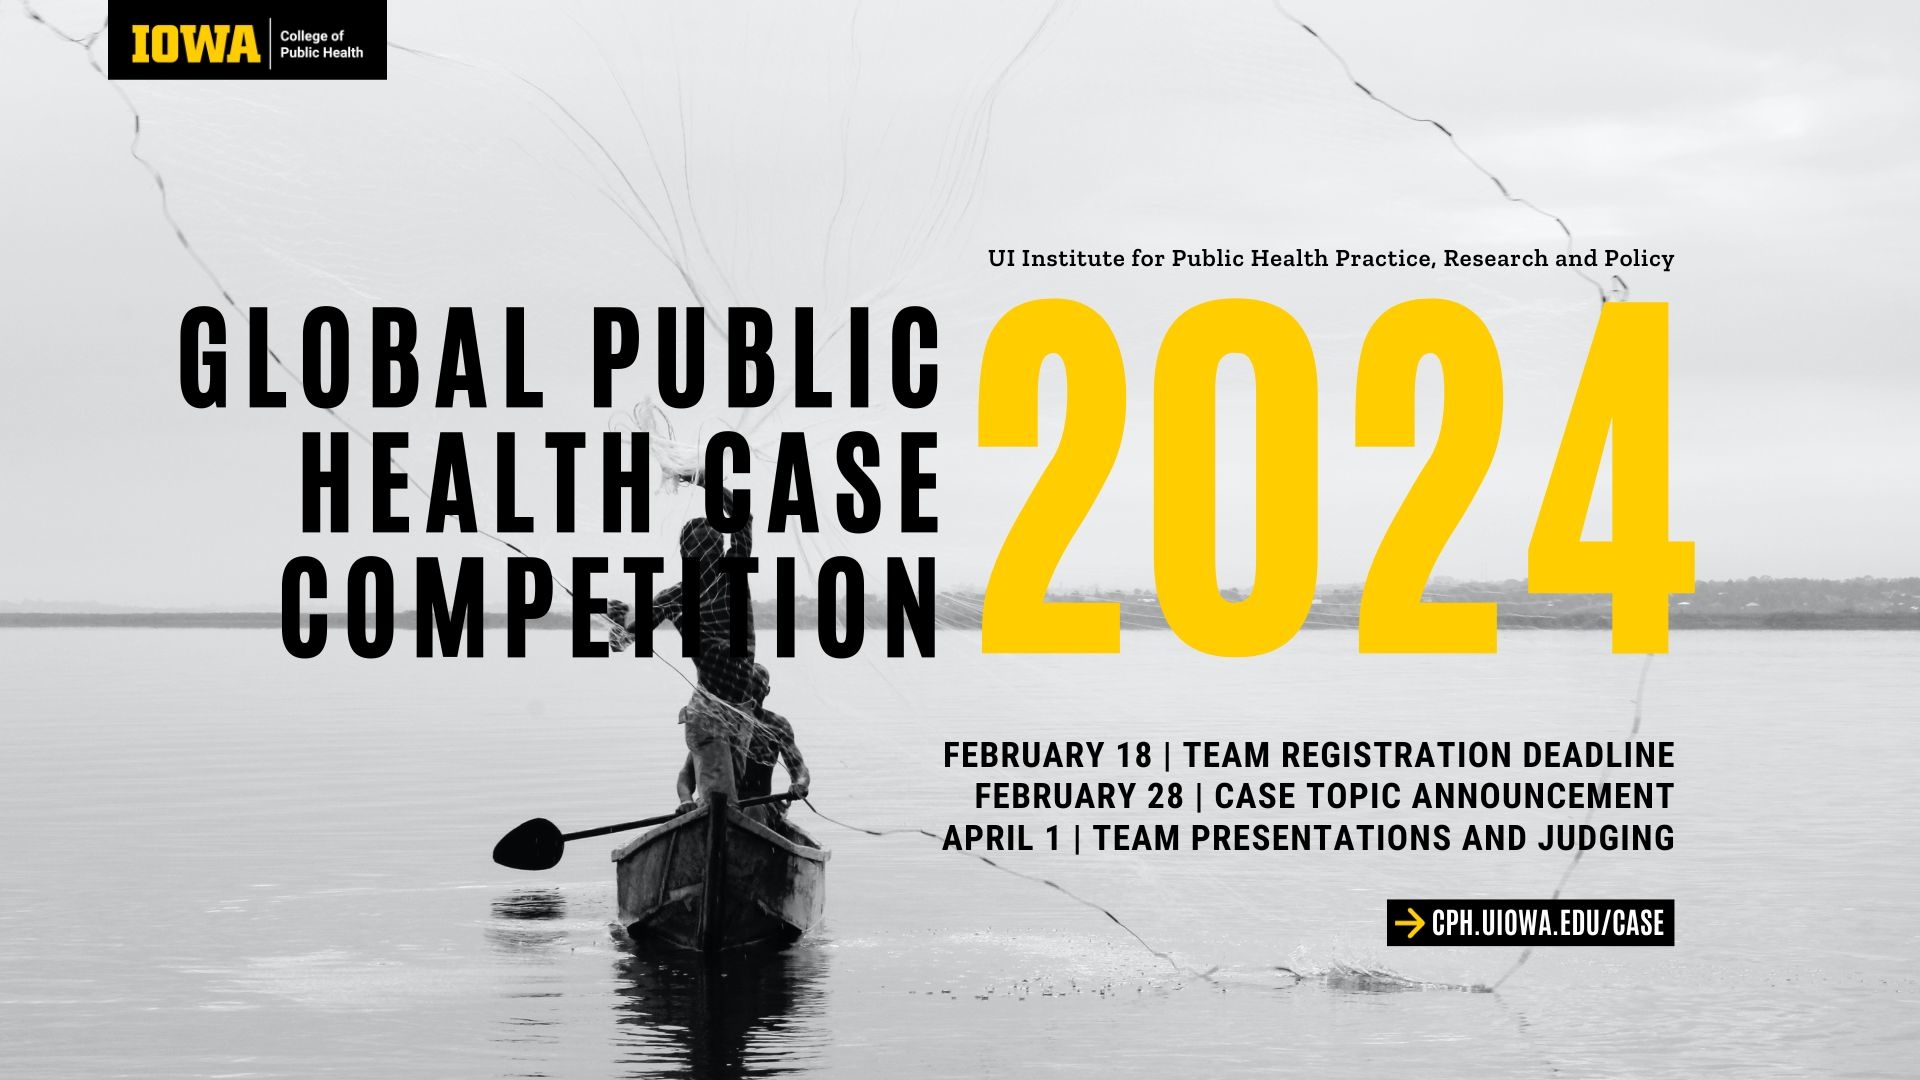 Global healh case competition